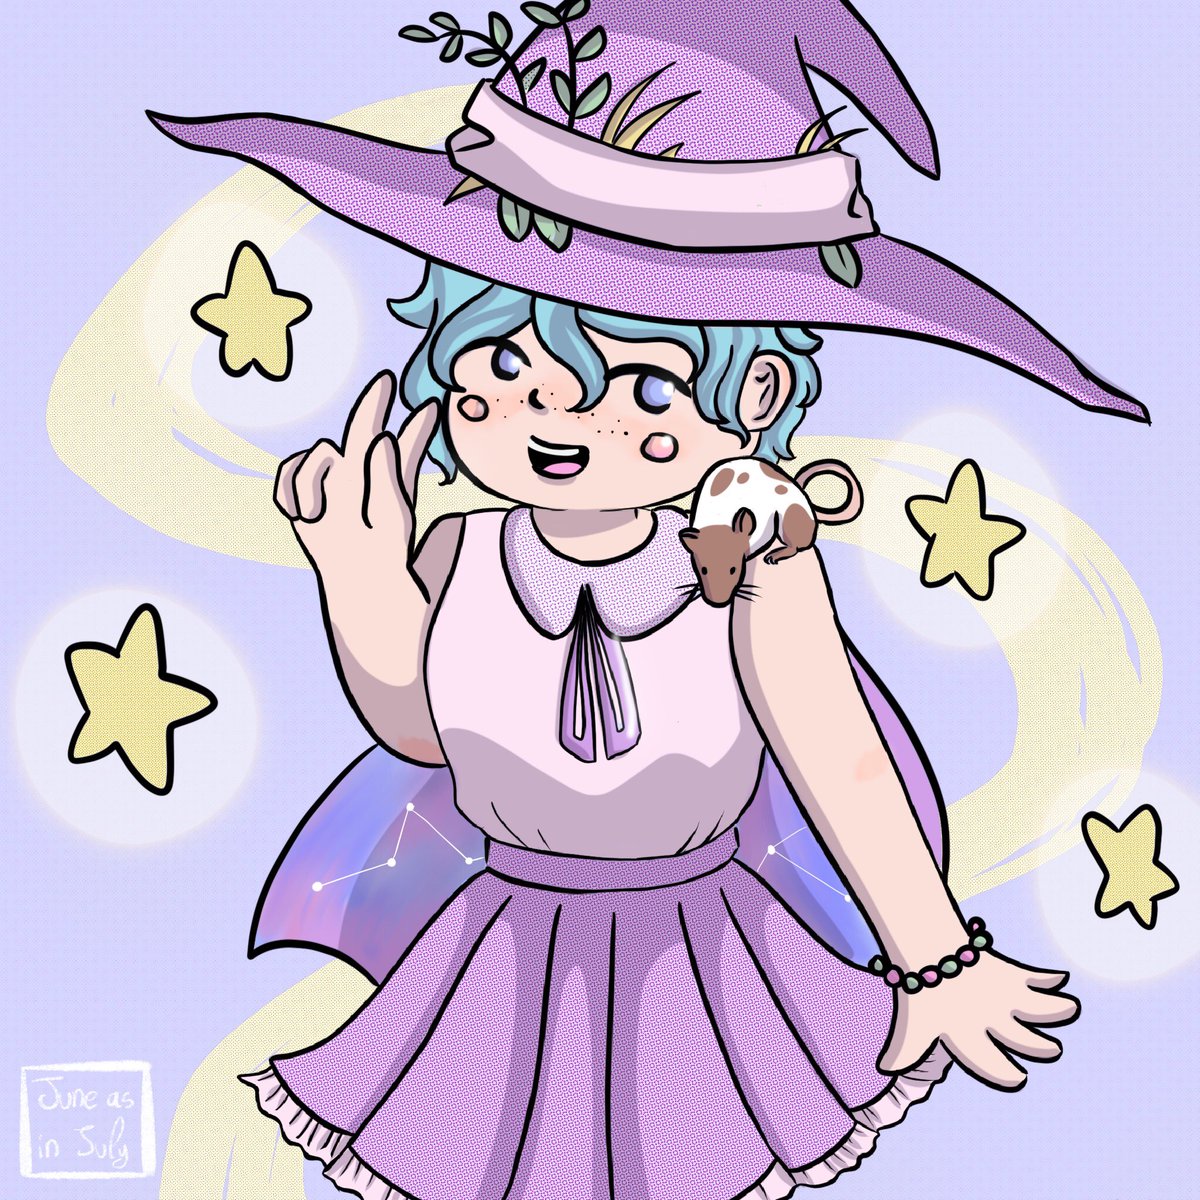 This artwork isn’t really my best lmao Here’s my latest one! I’m working on this tiny witch for my inktober prompts  #witchcovenareyou  Drawing everyday to improve, I want to publish comics and opening a redbubble store in the future. Follow me if you want to see more 